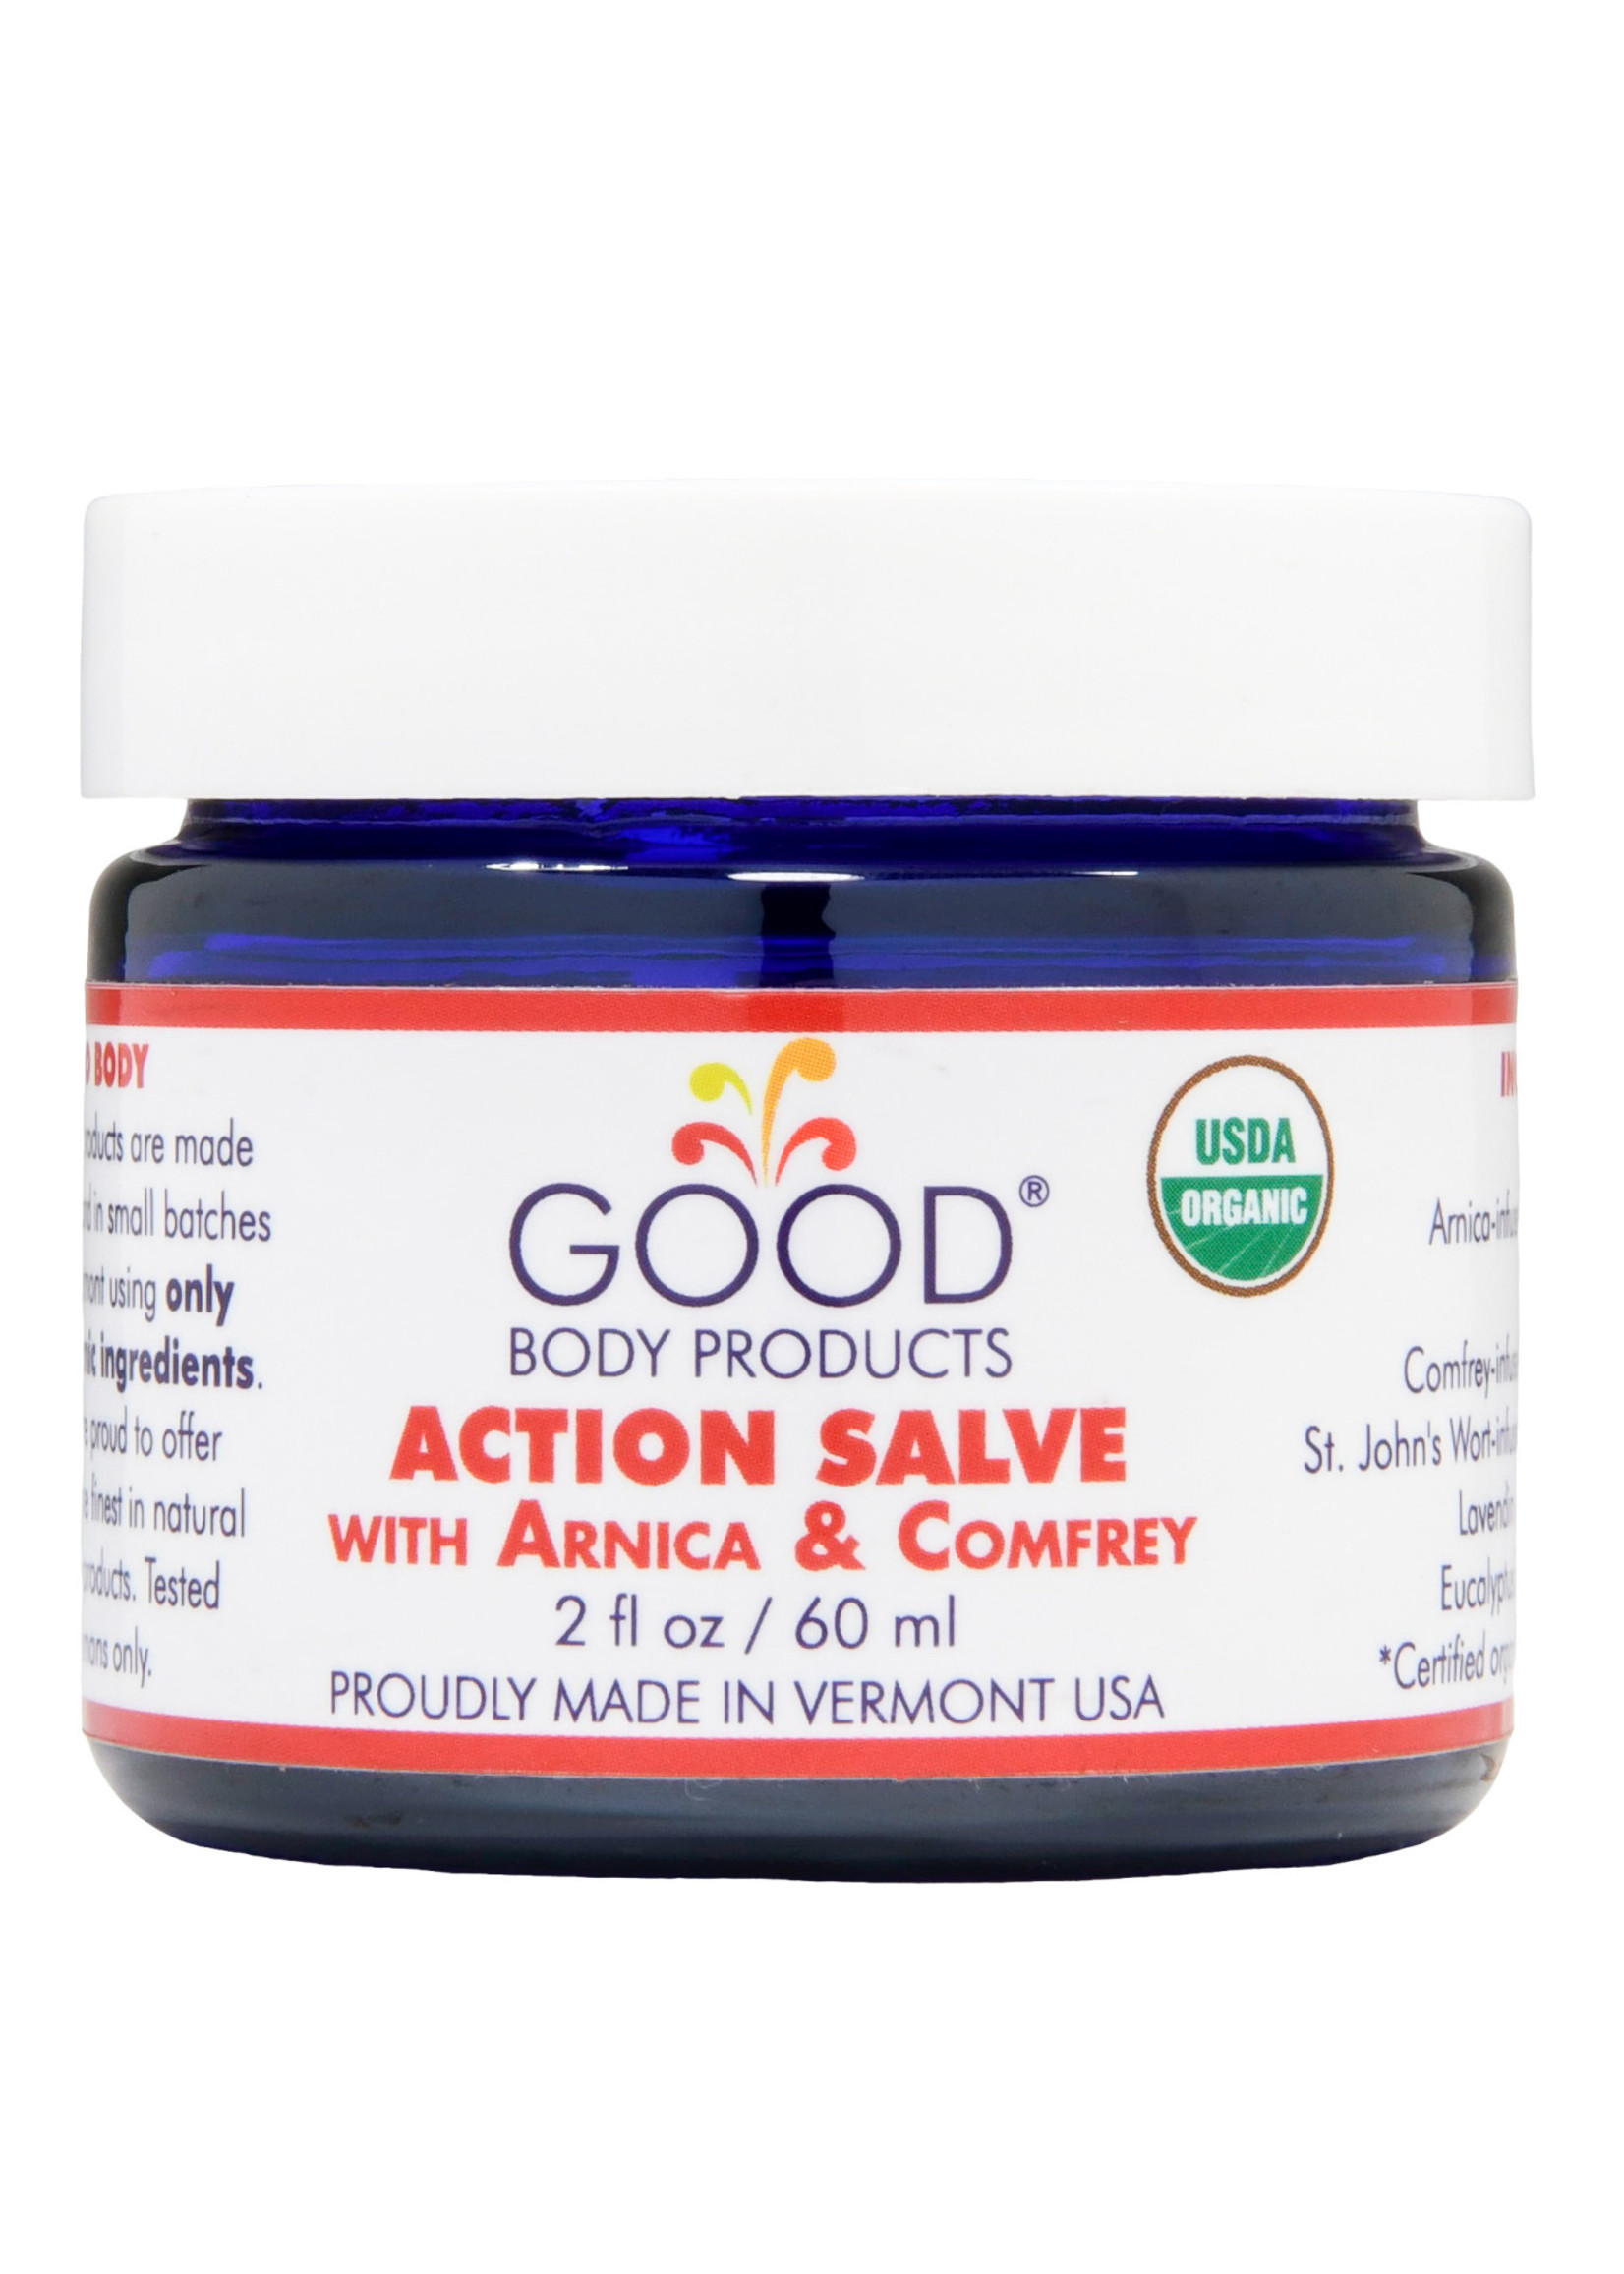 Good Body Products ACTION SALVE with Arnica and Comfrey